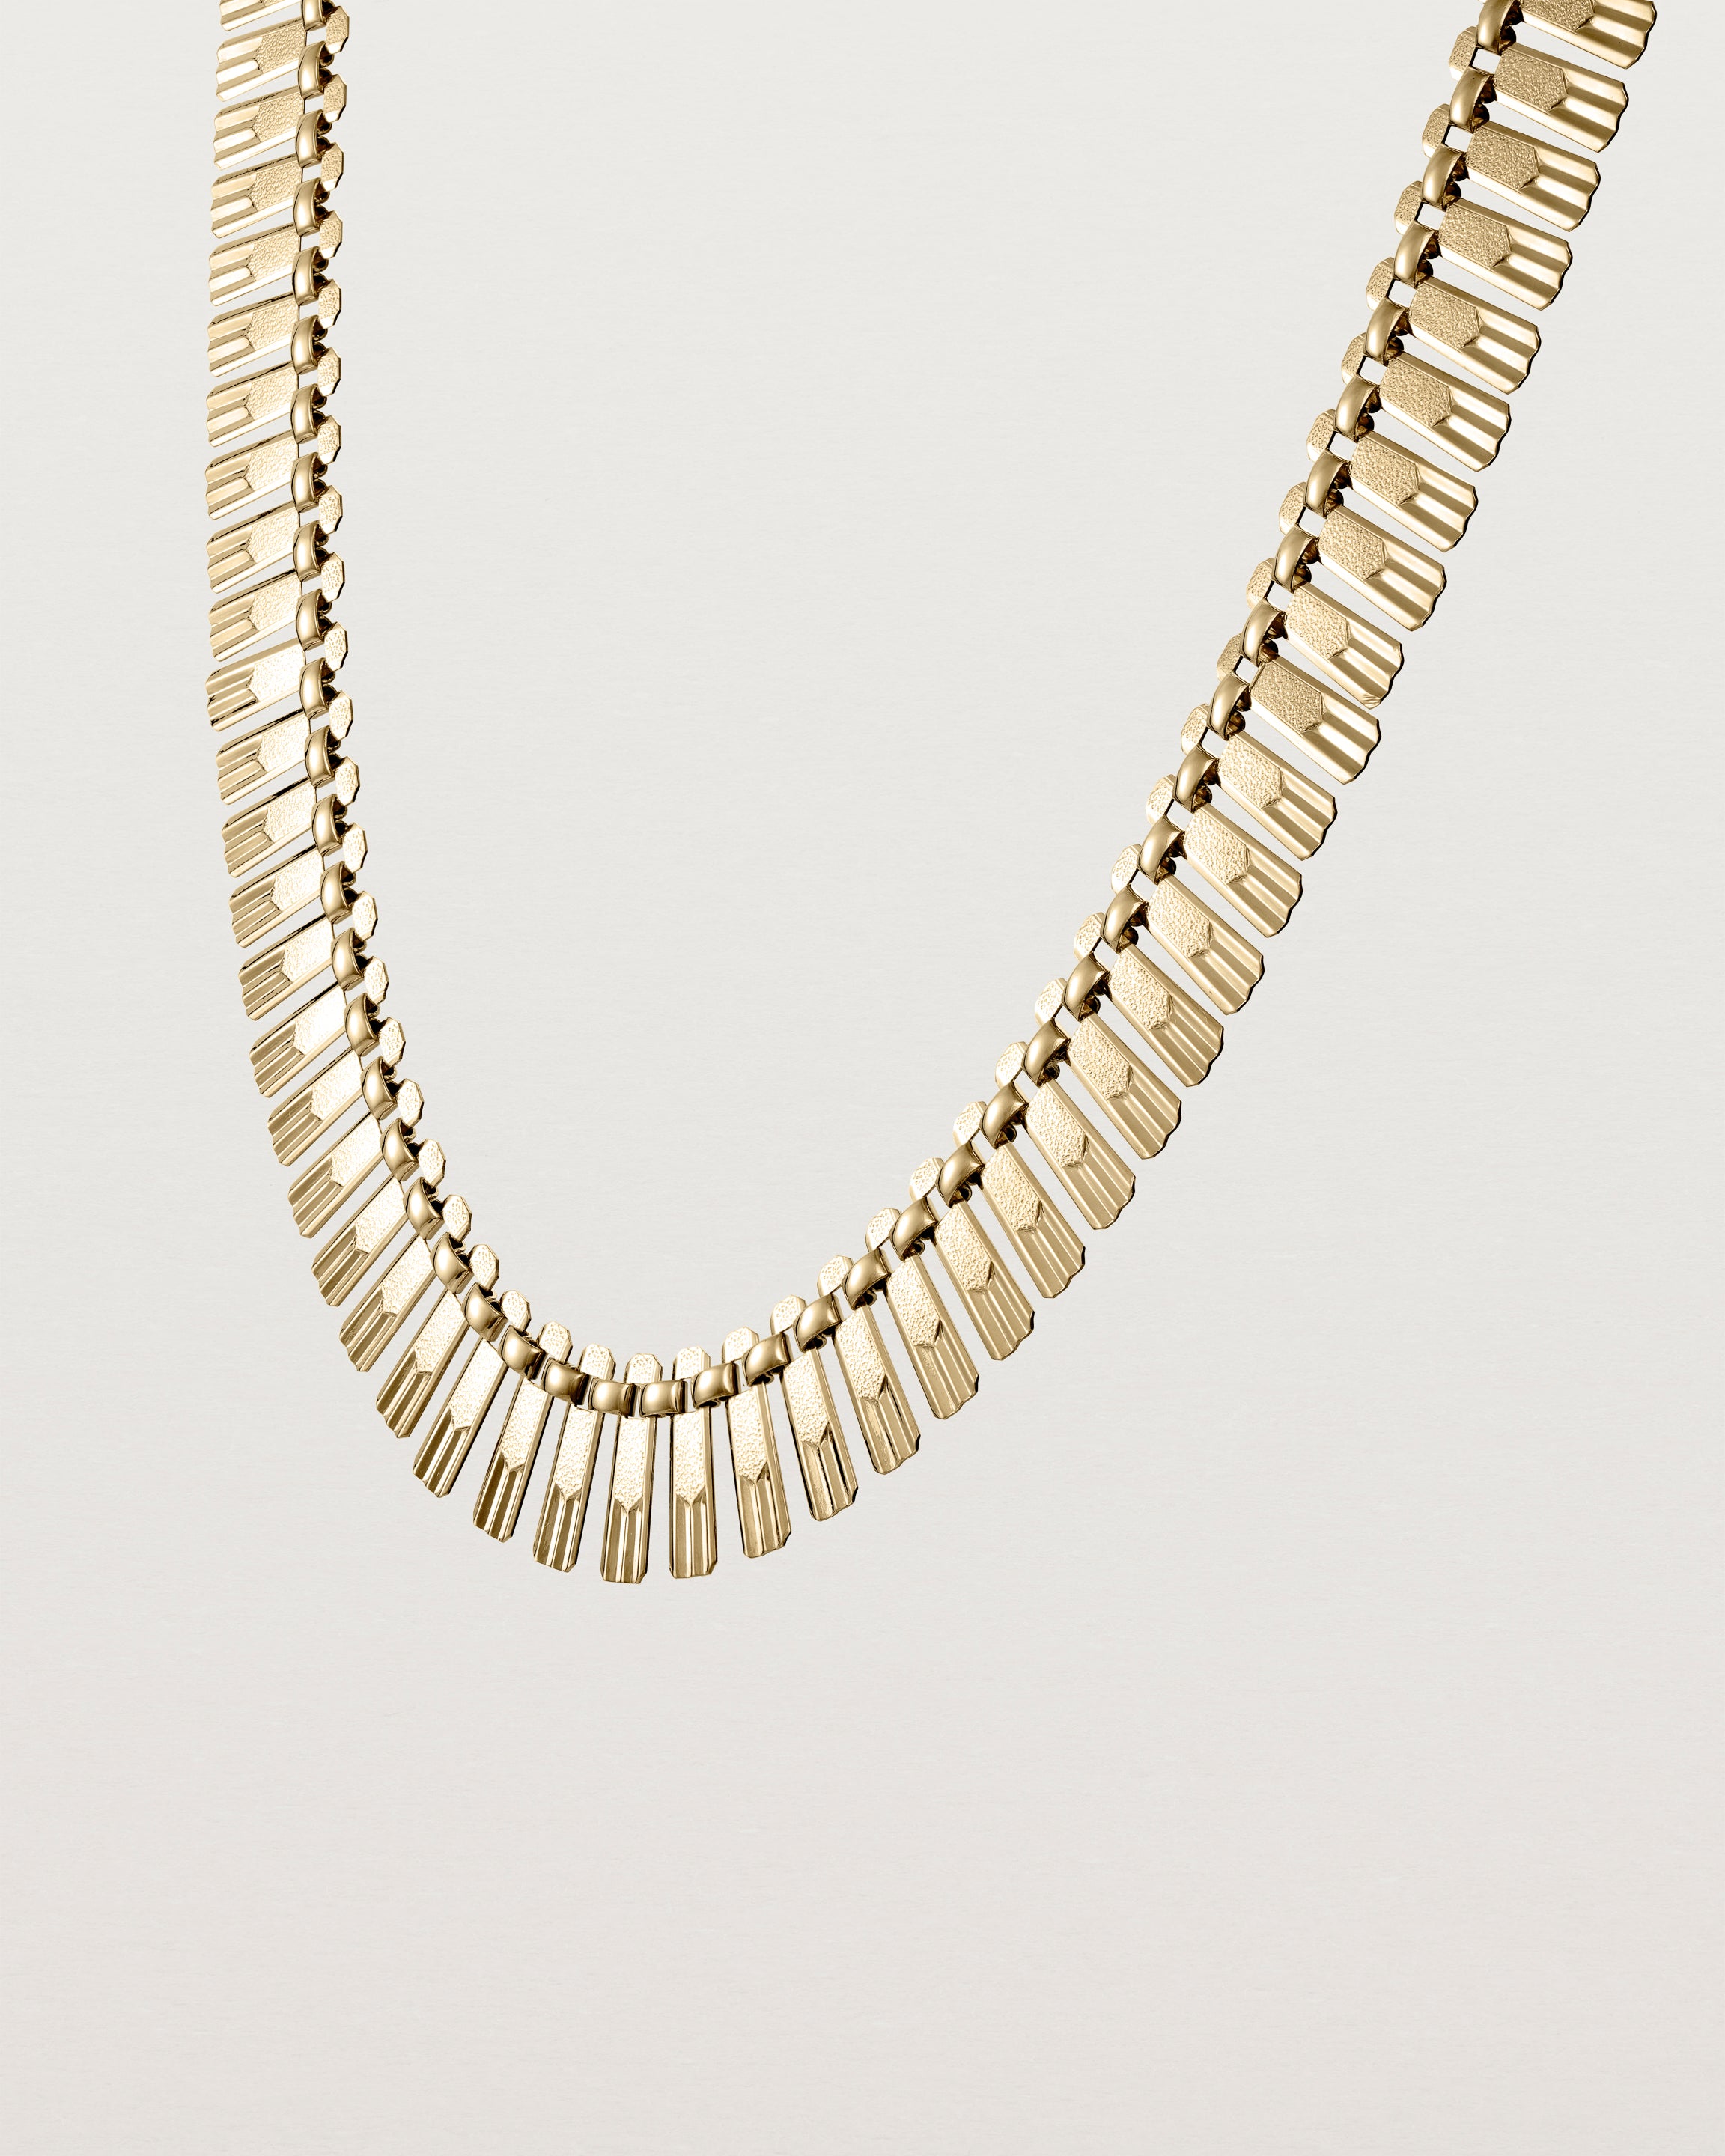 Angled view of the Mabel Vintage Necklace.